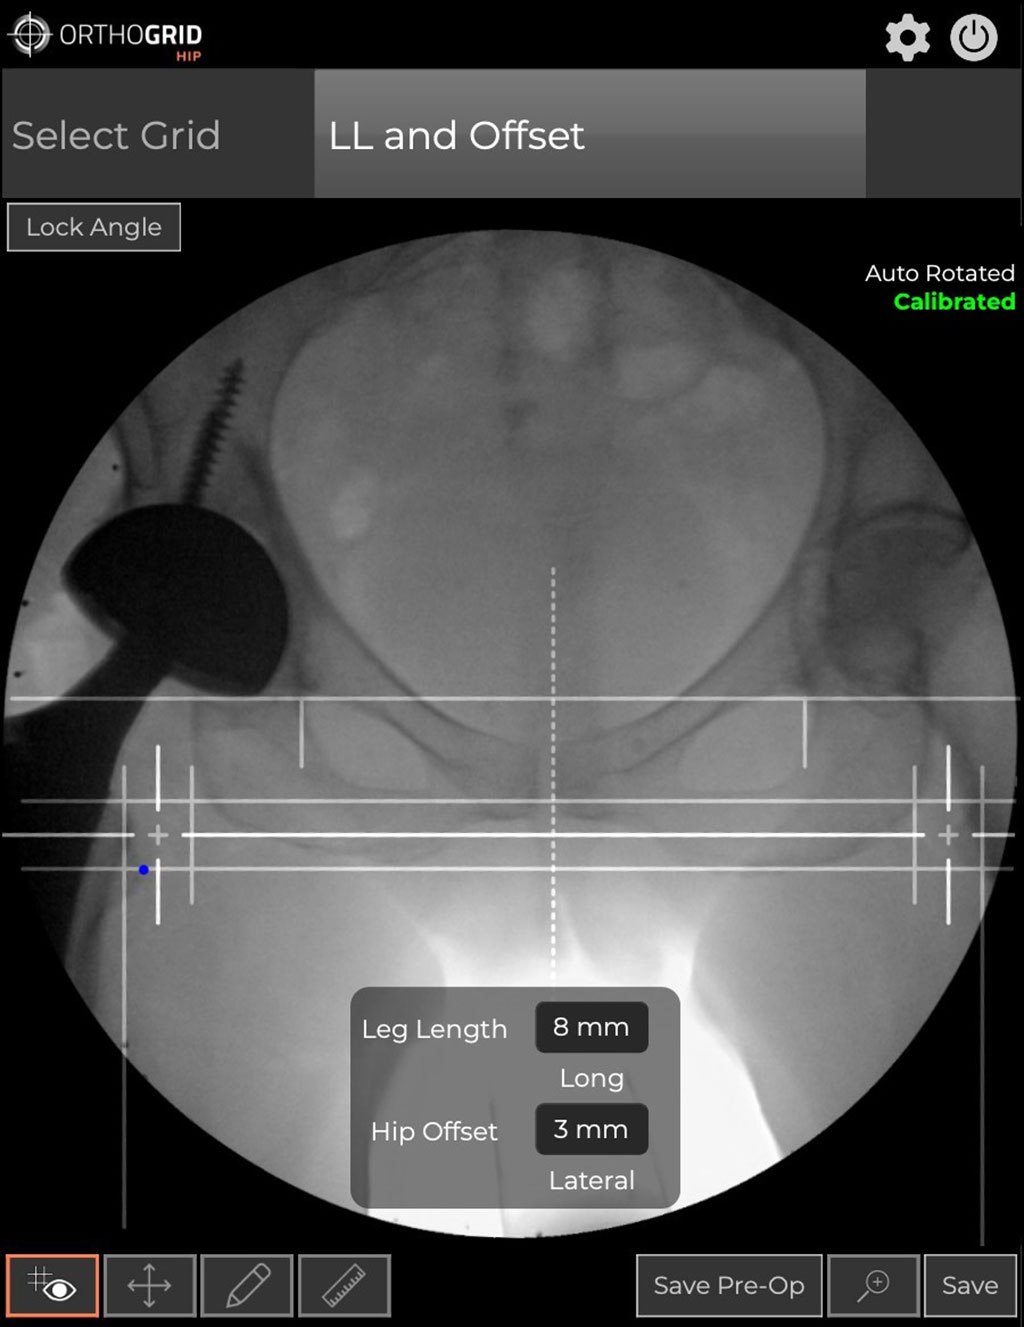 Image: The OrthoGrid Hip tool for direct anterior approach THA (Photo courtesy of OrthoGrid)